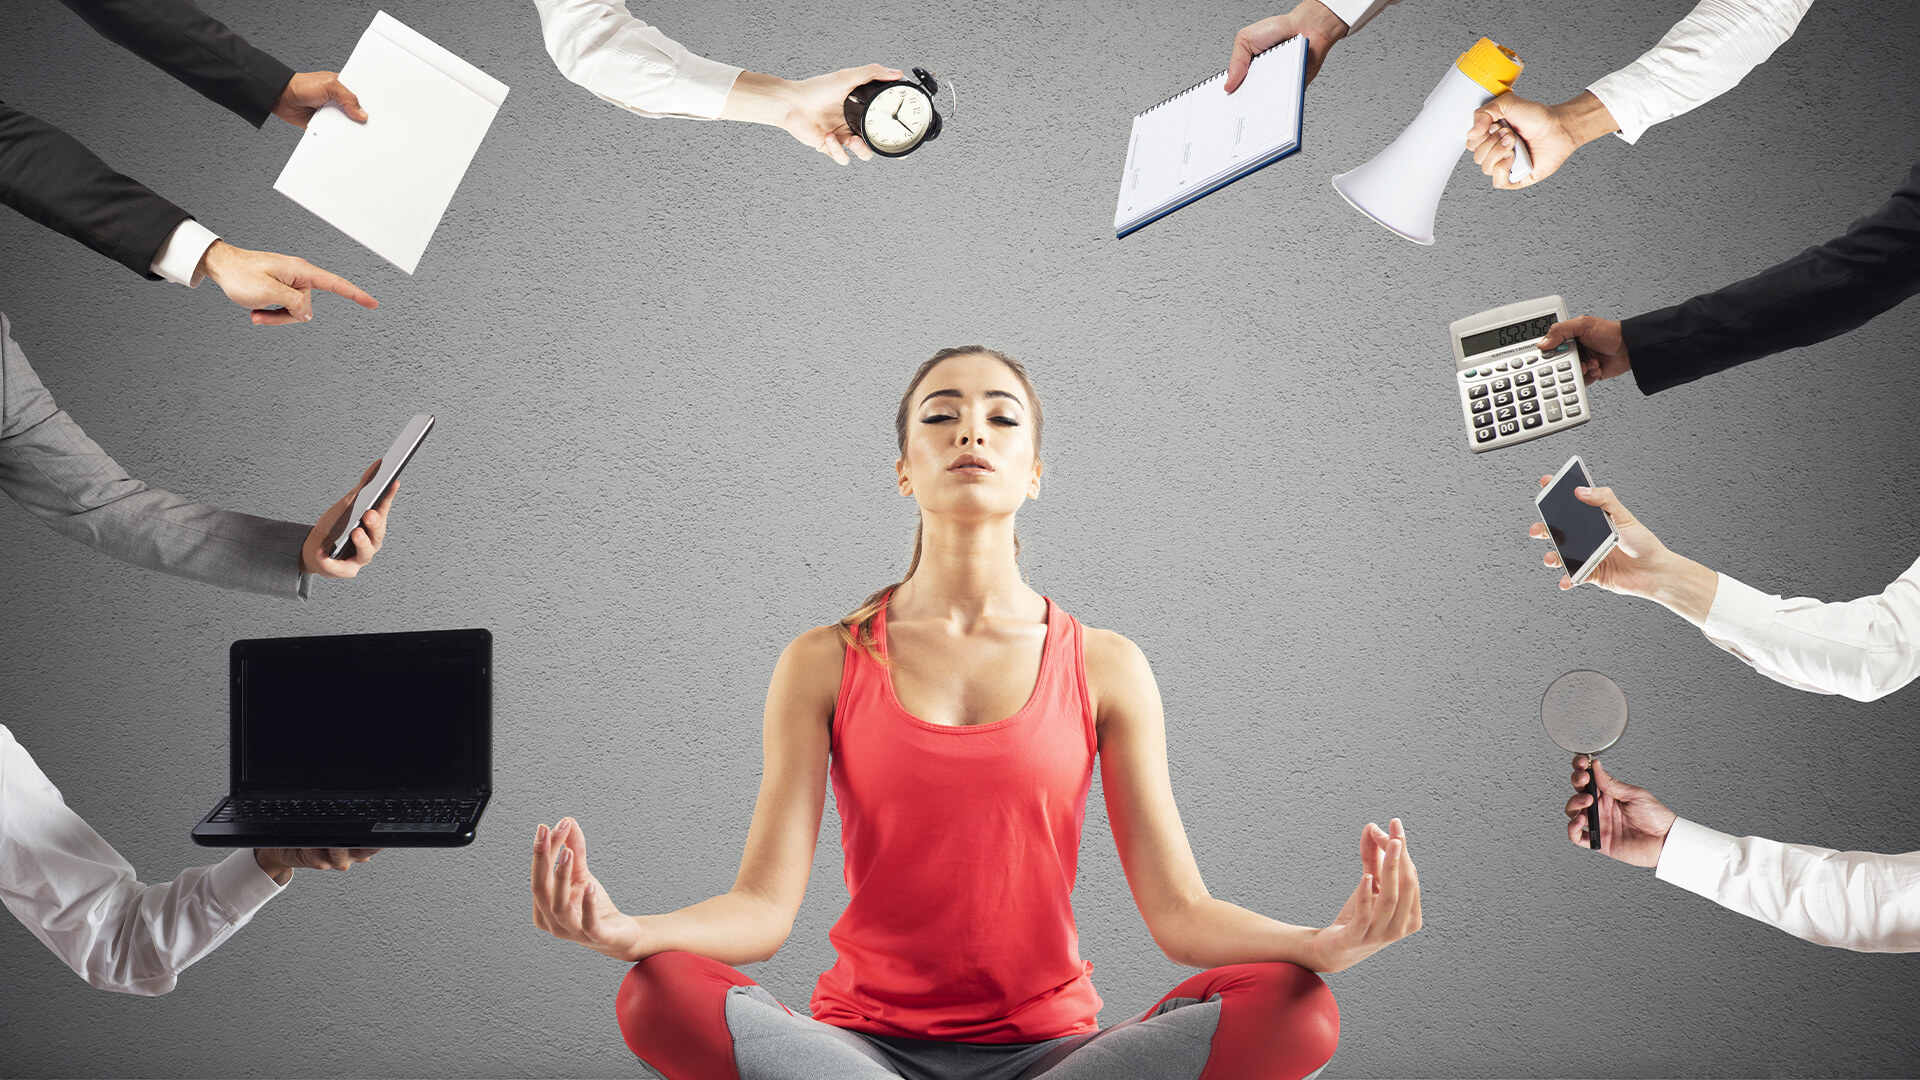 Woman tries to keep calm with yoga due to stress and overwork at work